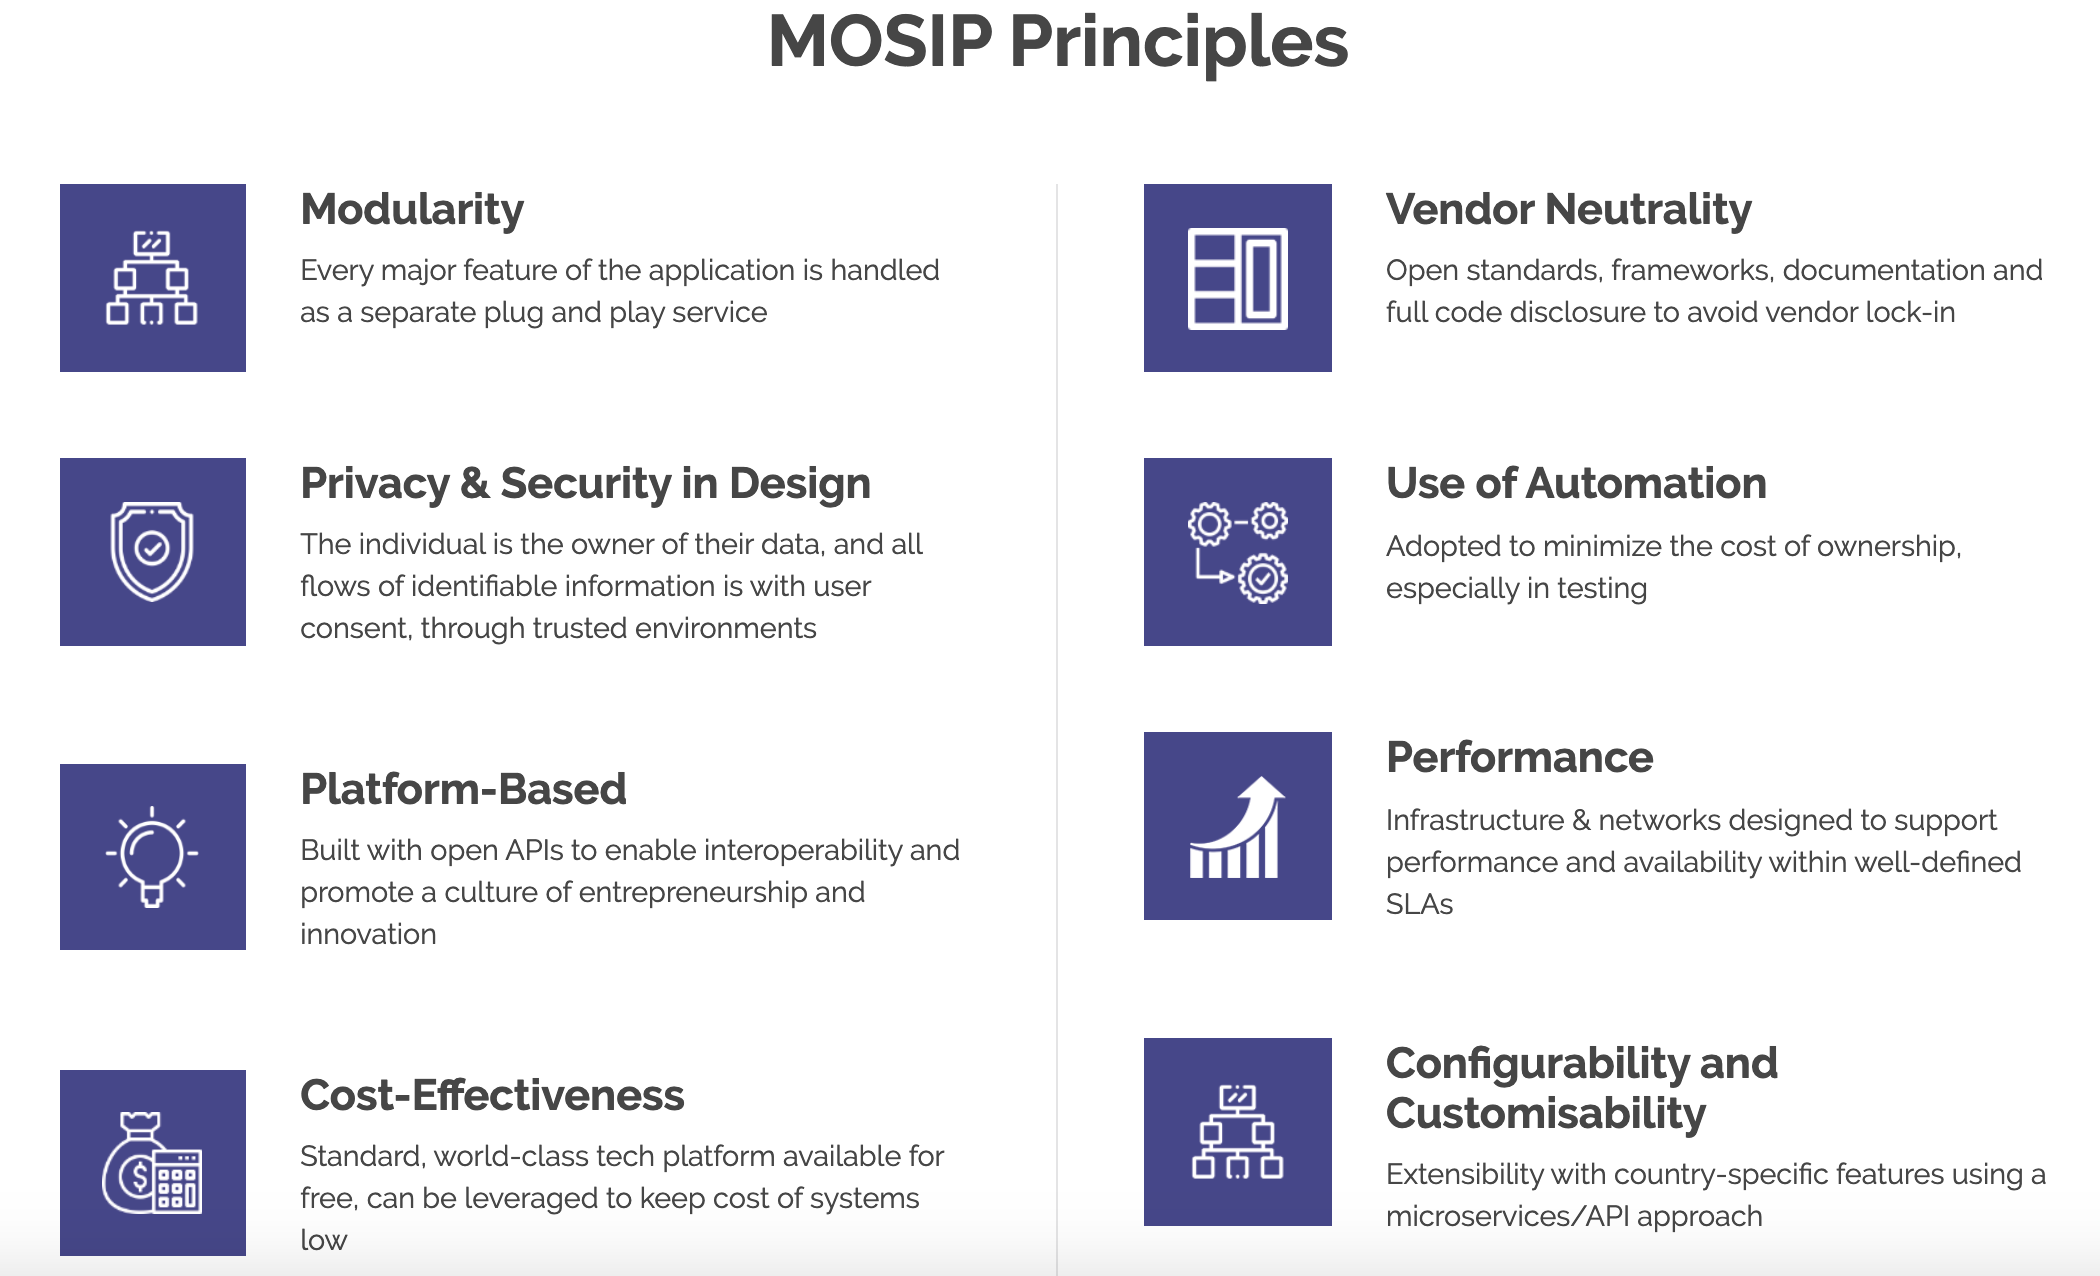 MOSIP, Open-Source National ID System, Gains Momentum in Africa and Asia